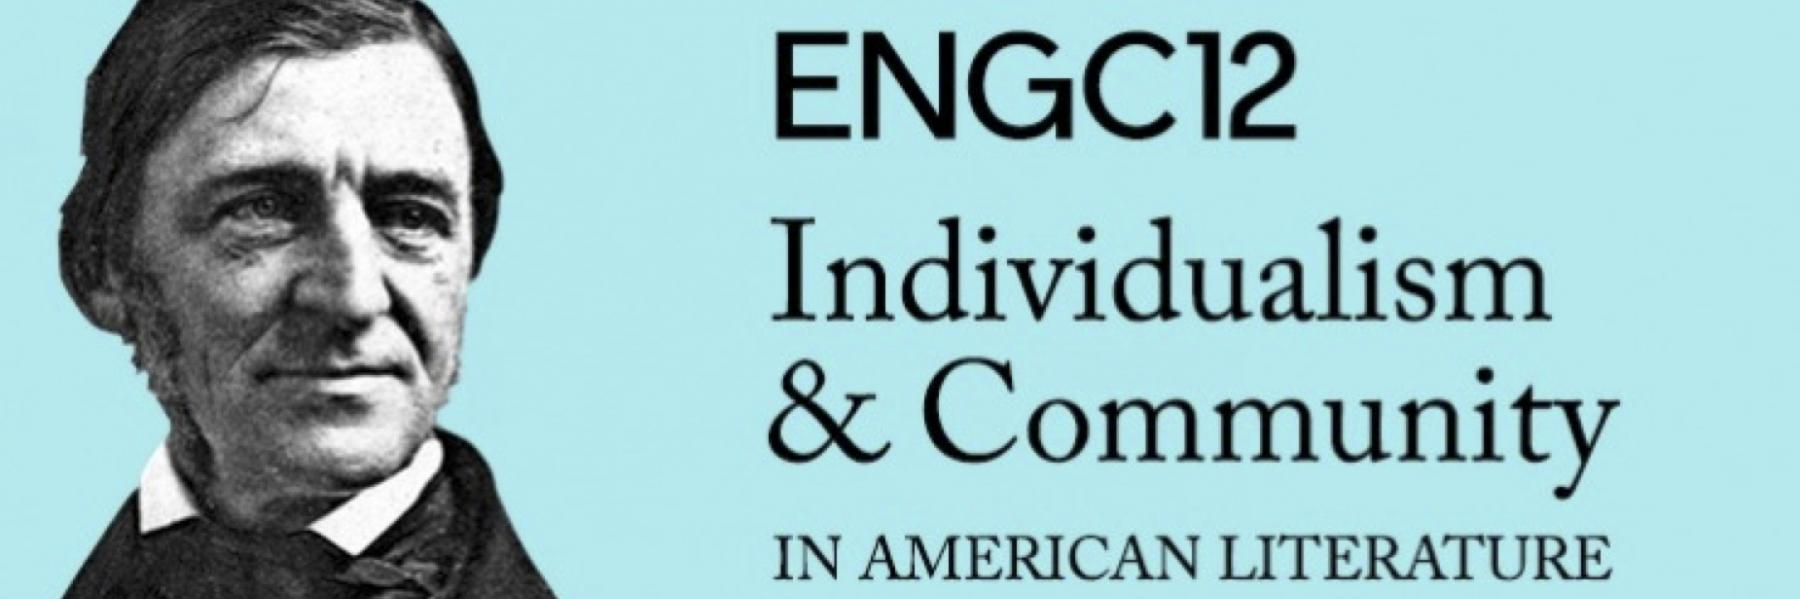 ENGC12: Individualism and Community in American Literature 